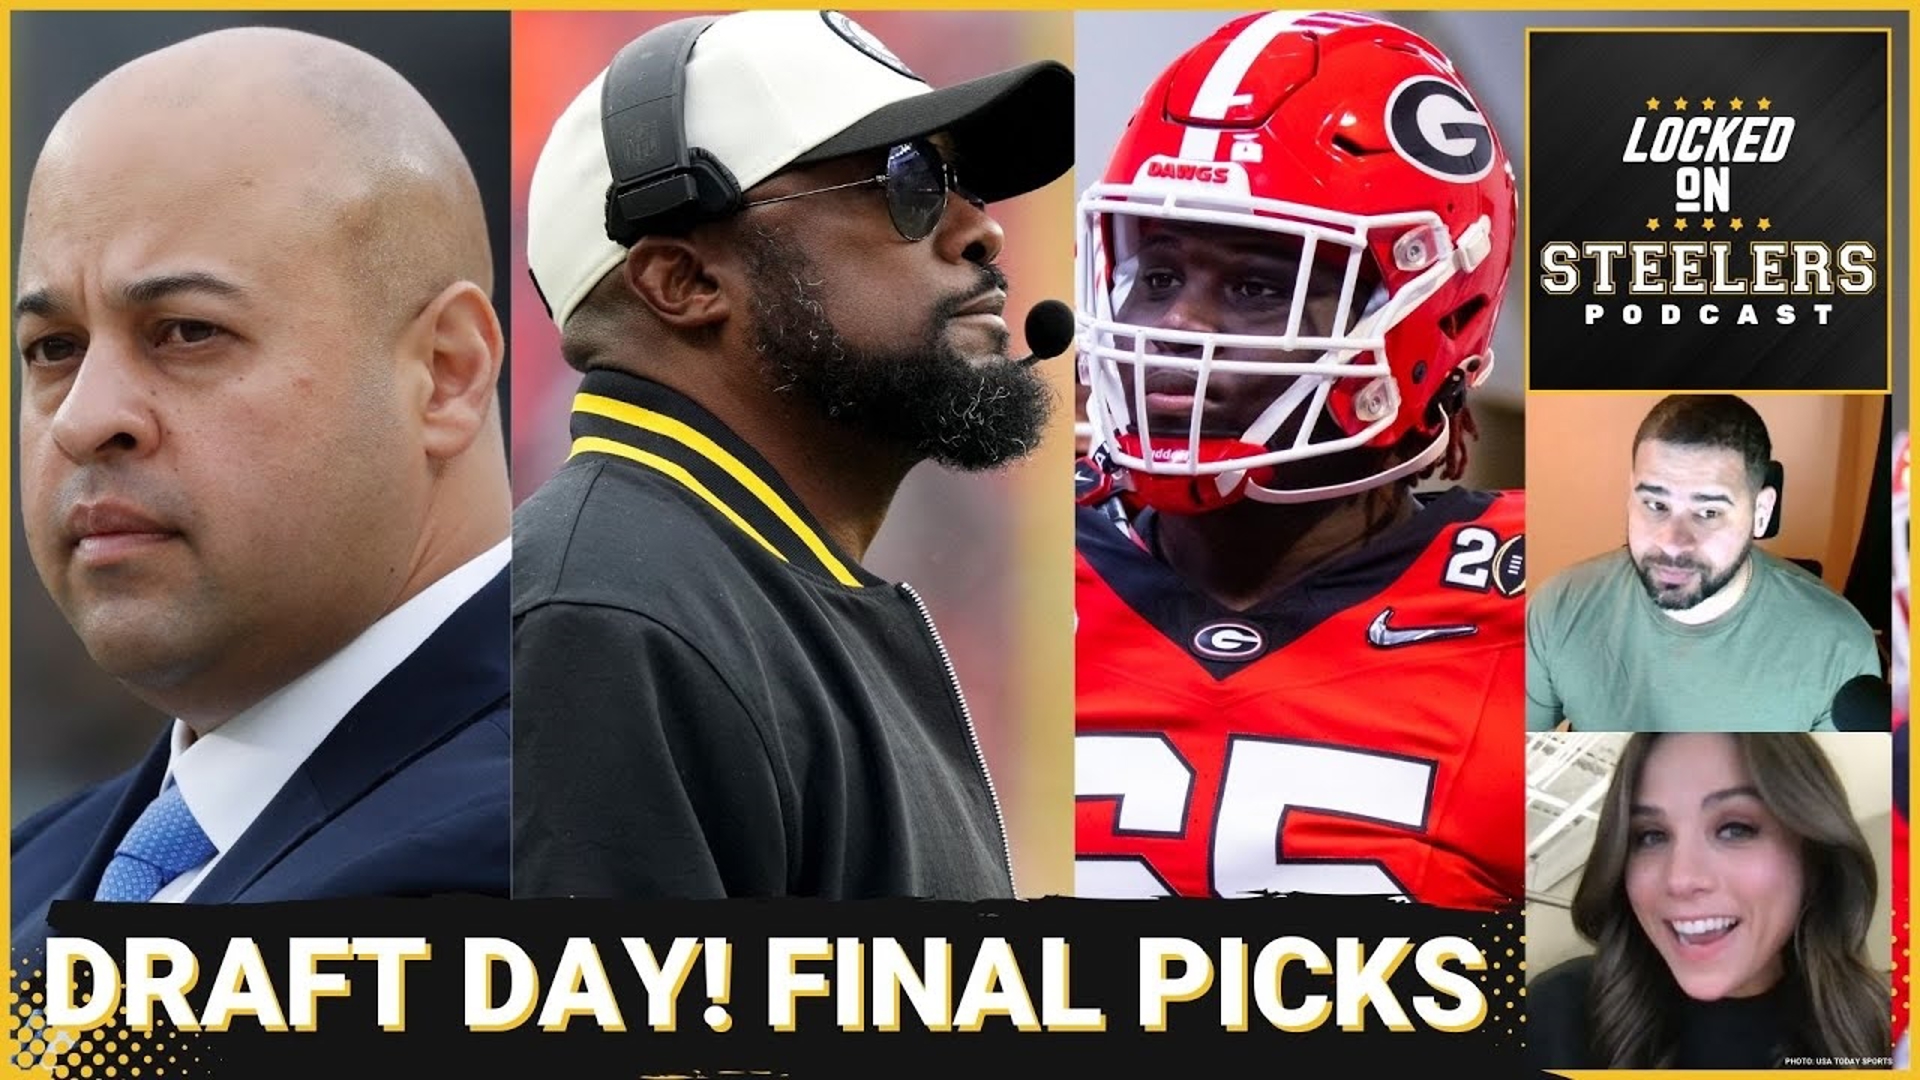 The Pittsburgh Steelers appear ready for the first round of the NFL Draft, but who will they pick?